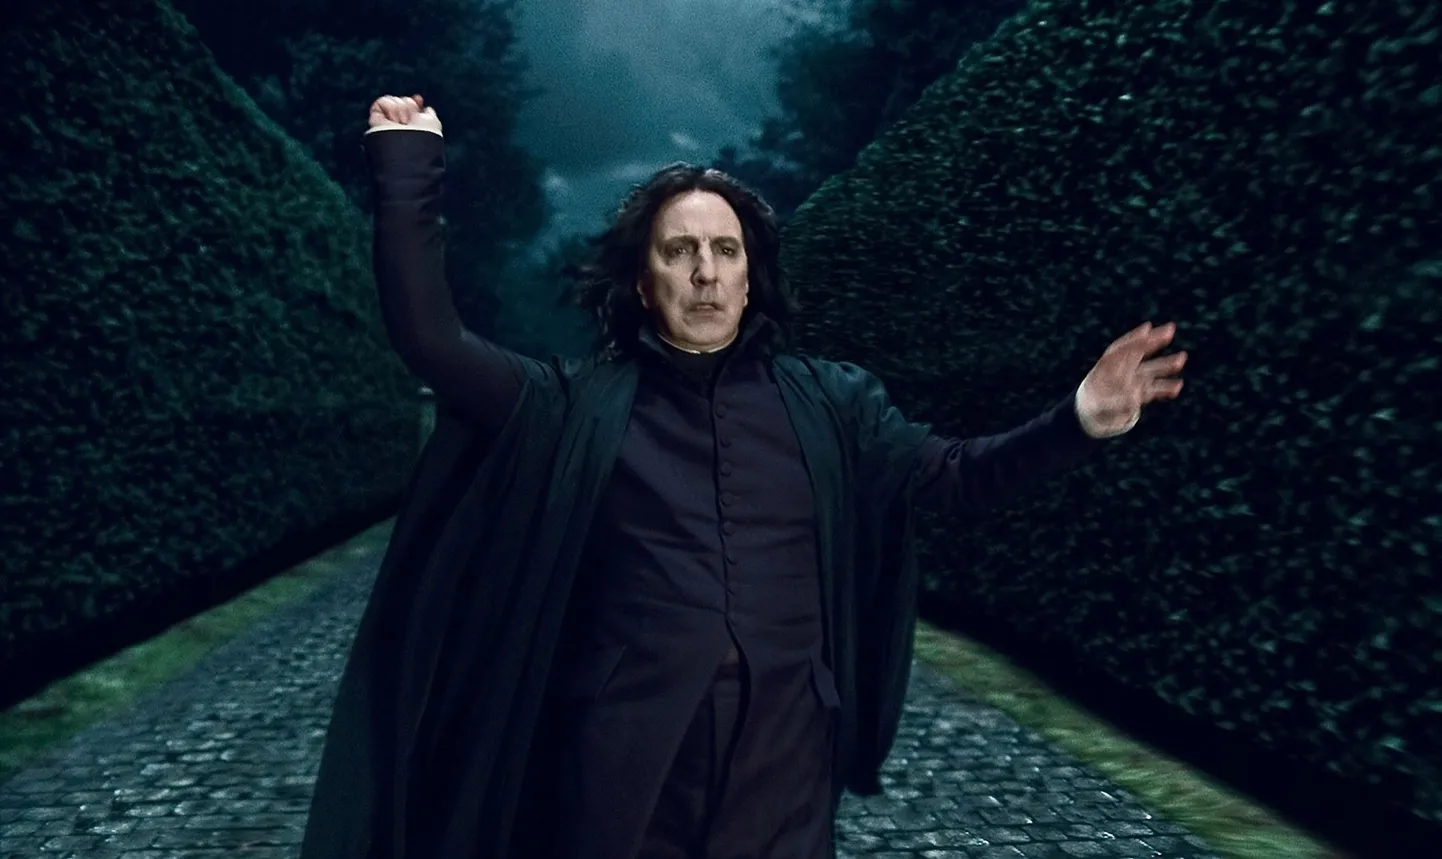 Alan Rickman filmis "Harry Potter and the Deathly Hallows Part 1"